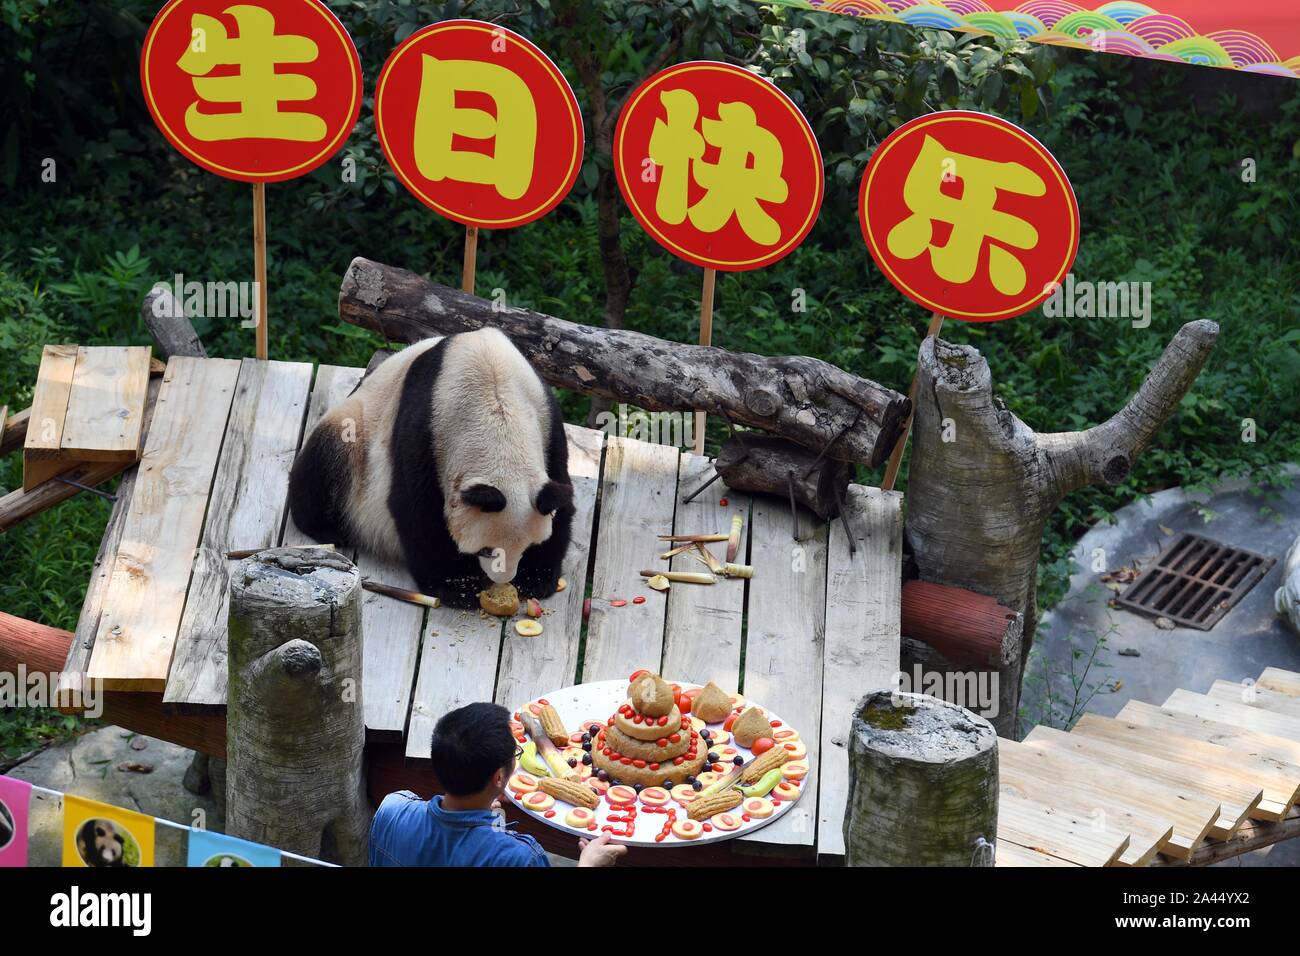 The giant panda Xin Xing eats her birthday cake made with fodder and fruits by tourists during her 37th birthday party at a zoo in Chongqing, China, 2 Stock Photo